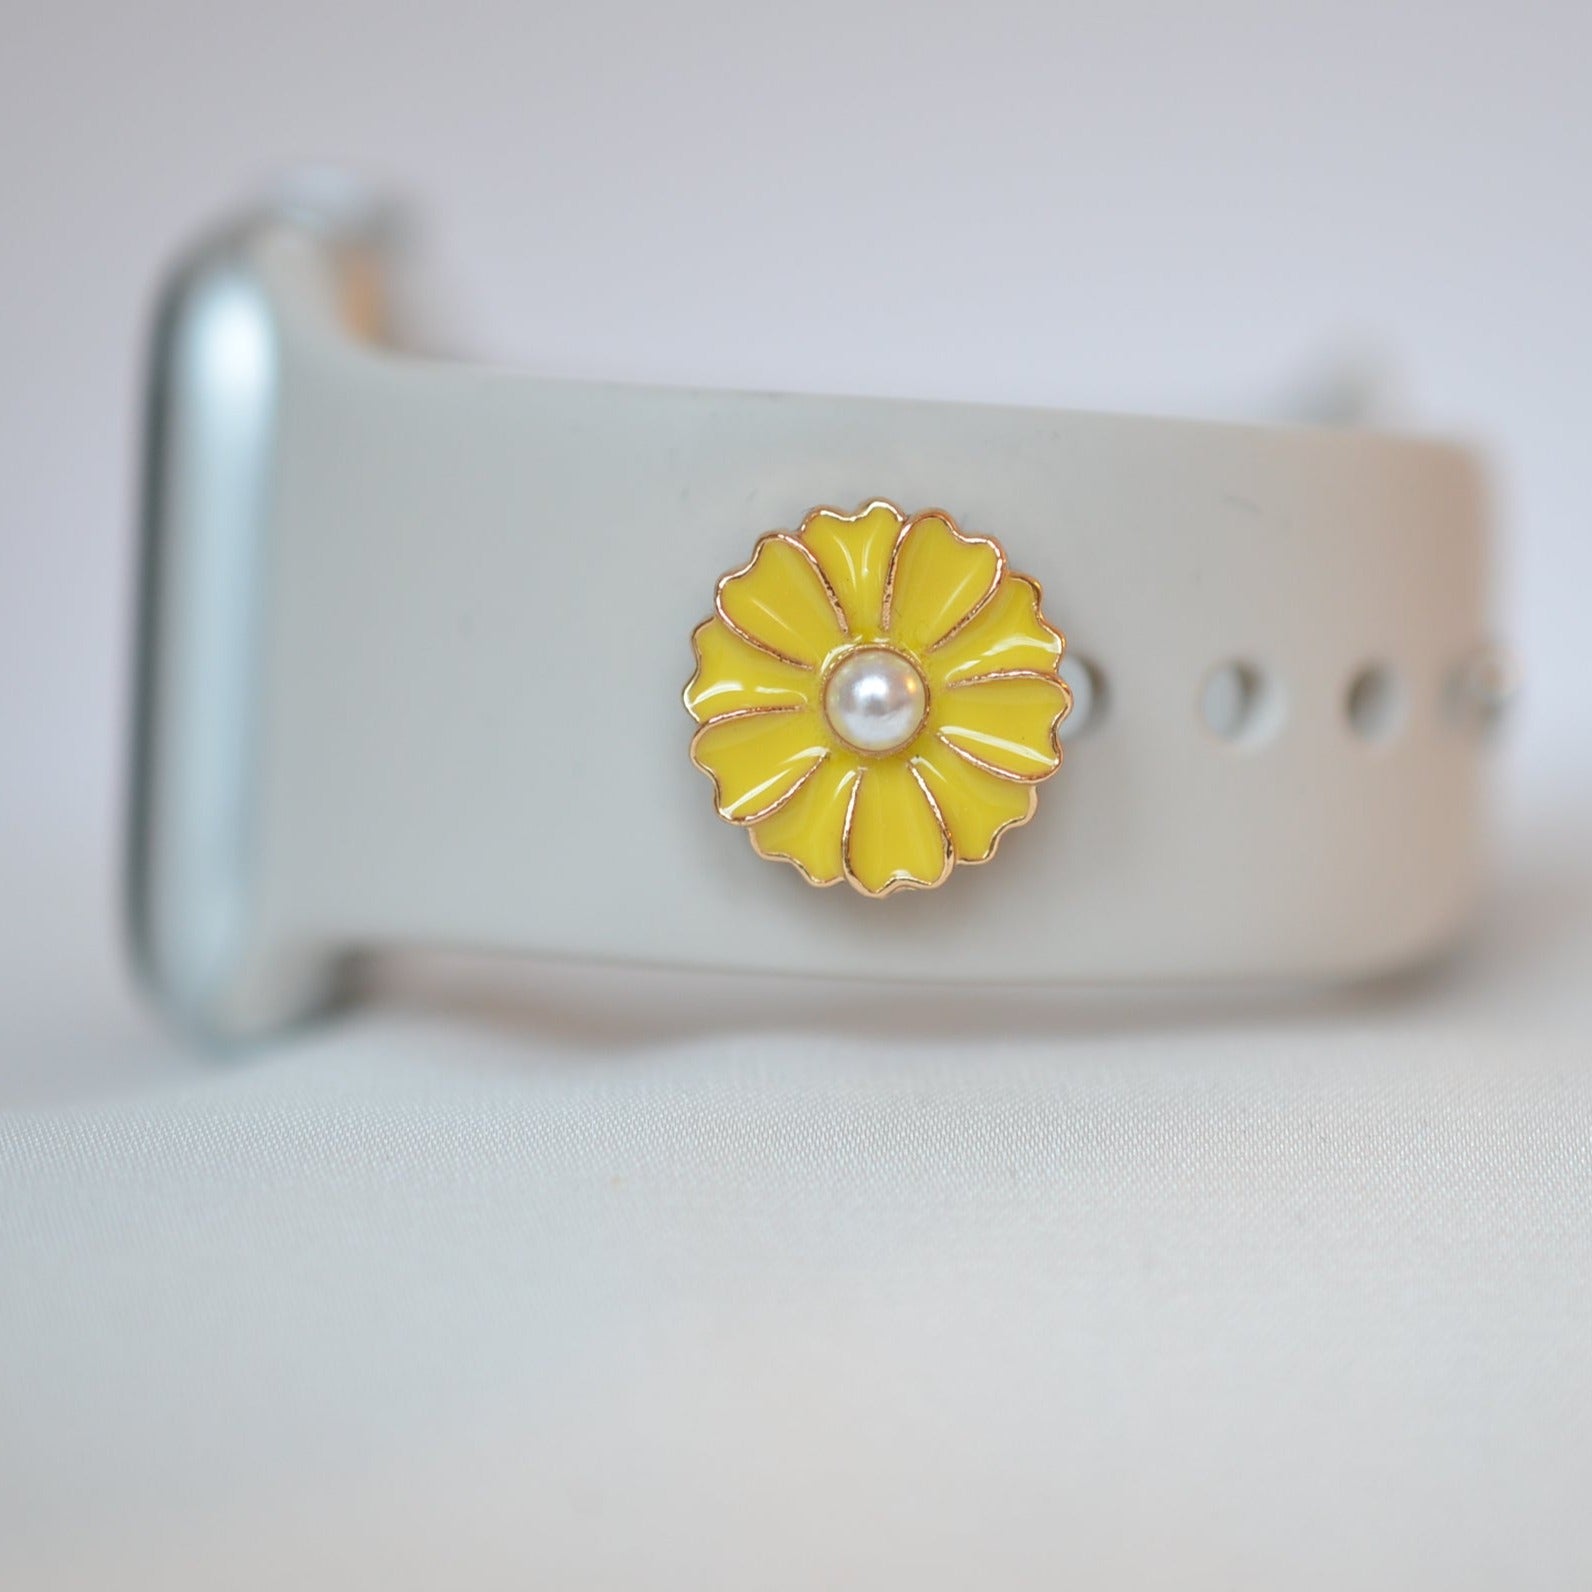 Yellow Flower with Pearl Stone Charm for Belts, Bags and Watch Bands